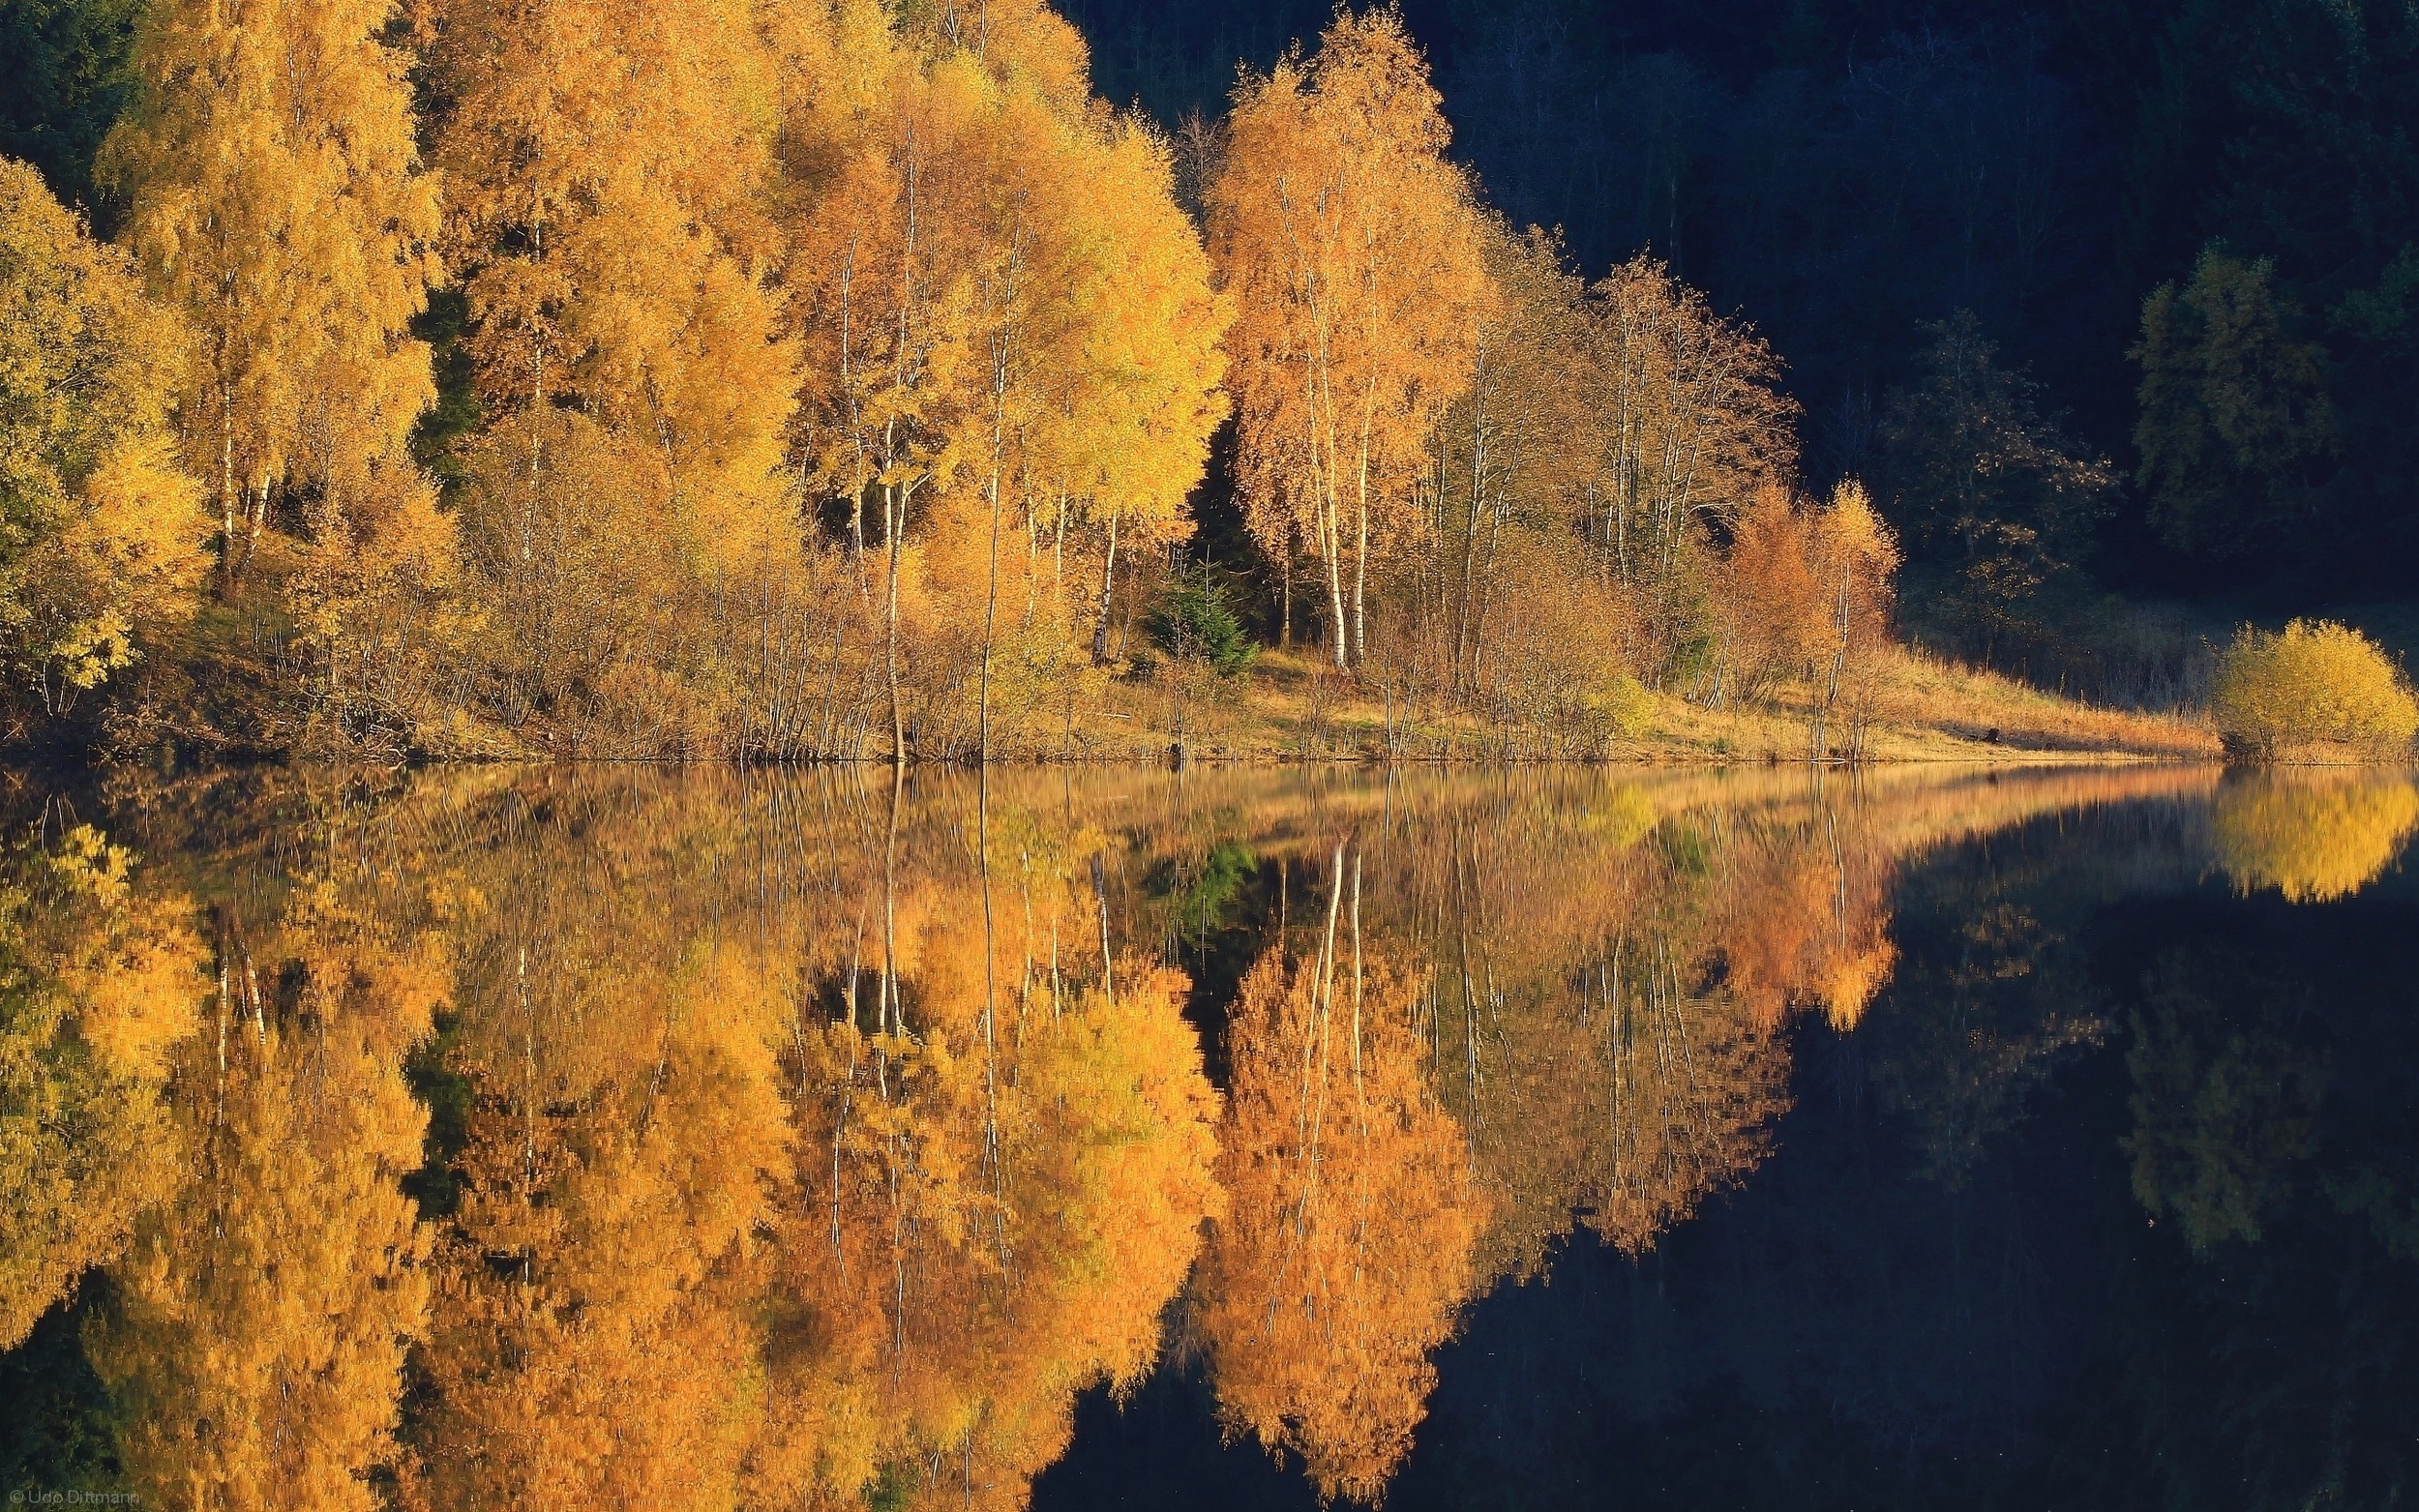 General 2500x1563 nature landscape lake forest fall water reflection trees calm yellow hills